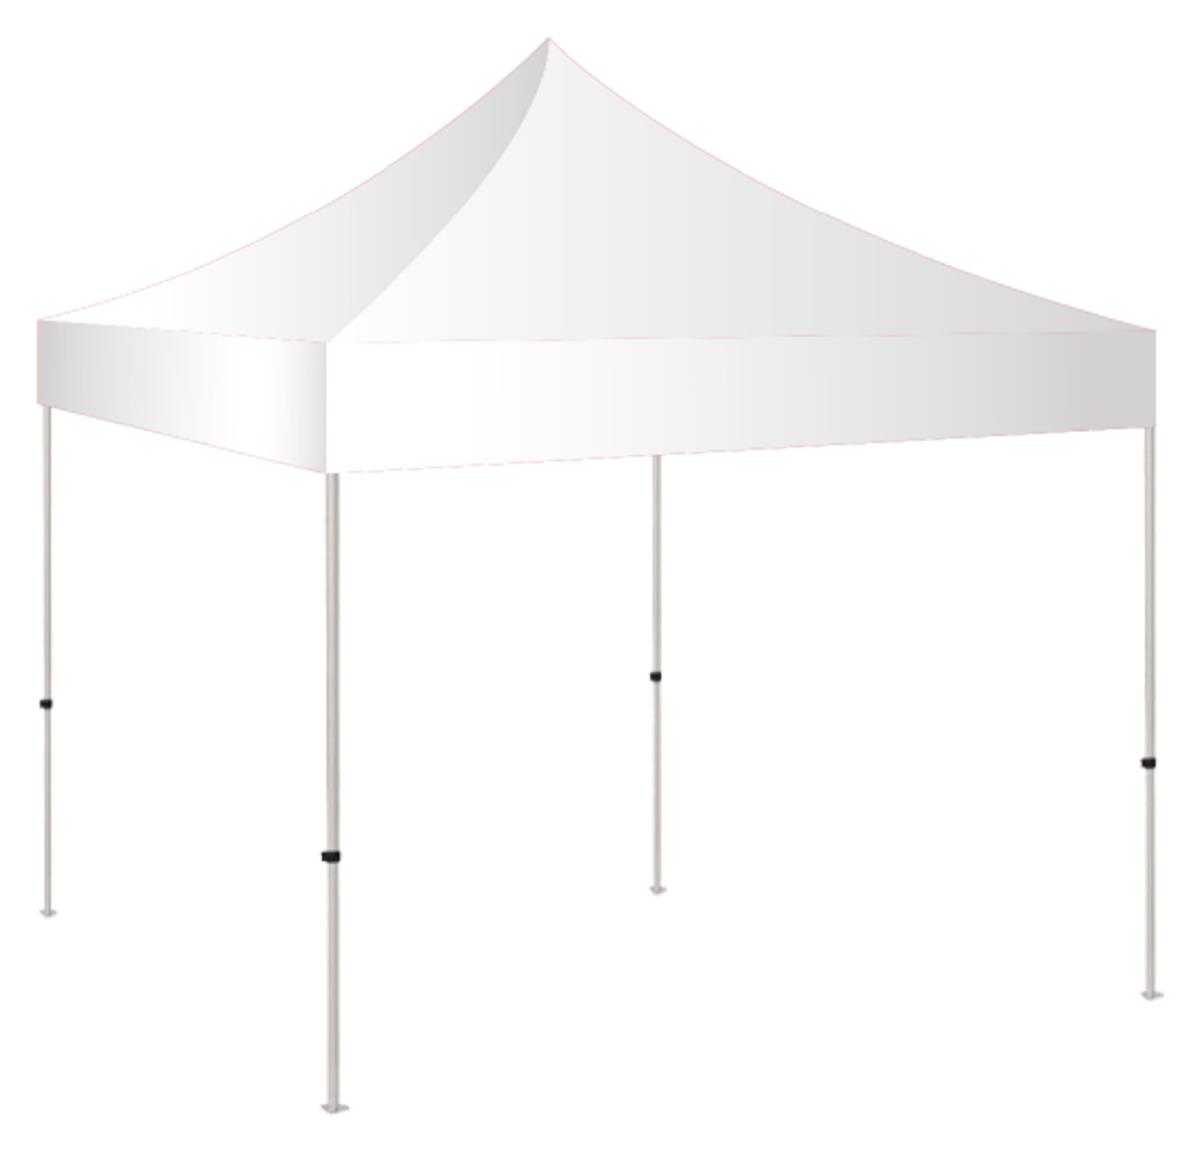 5x5 pop up canopy with 25 square feet of shade